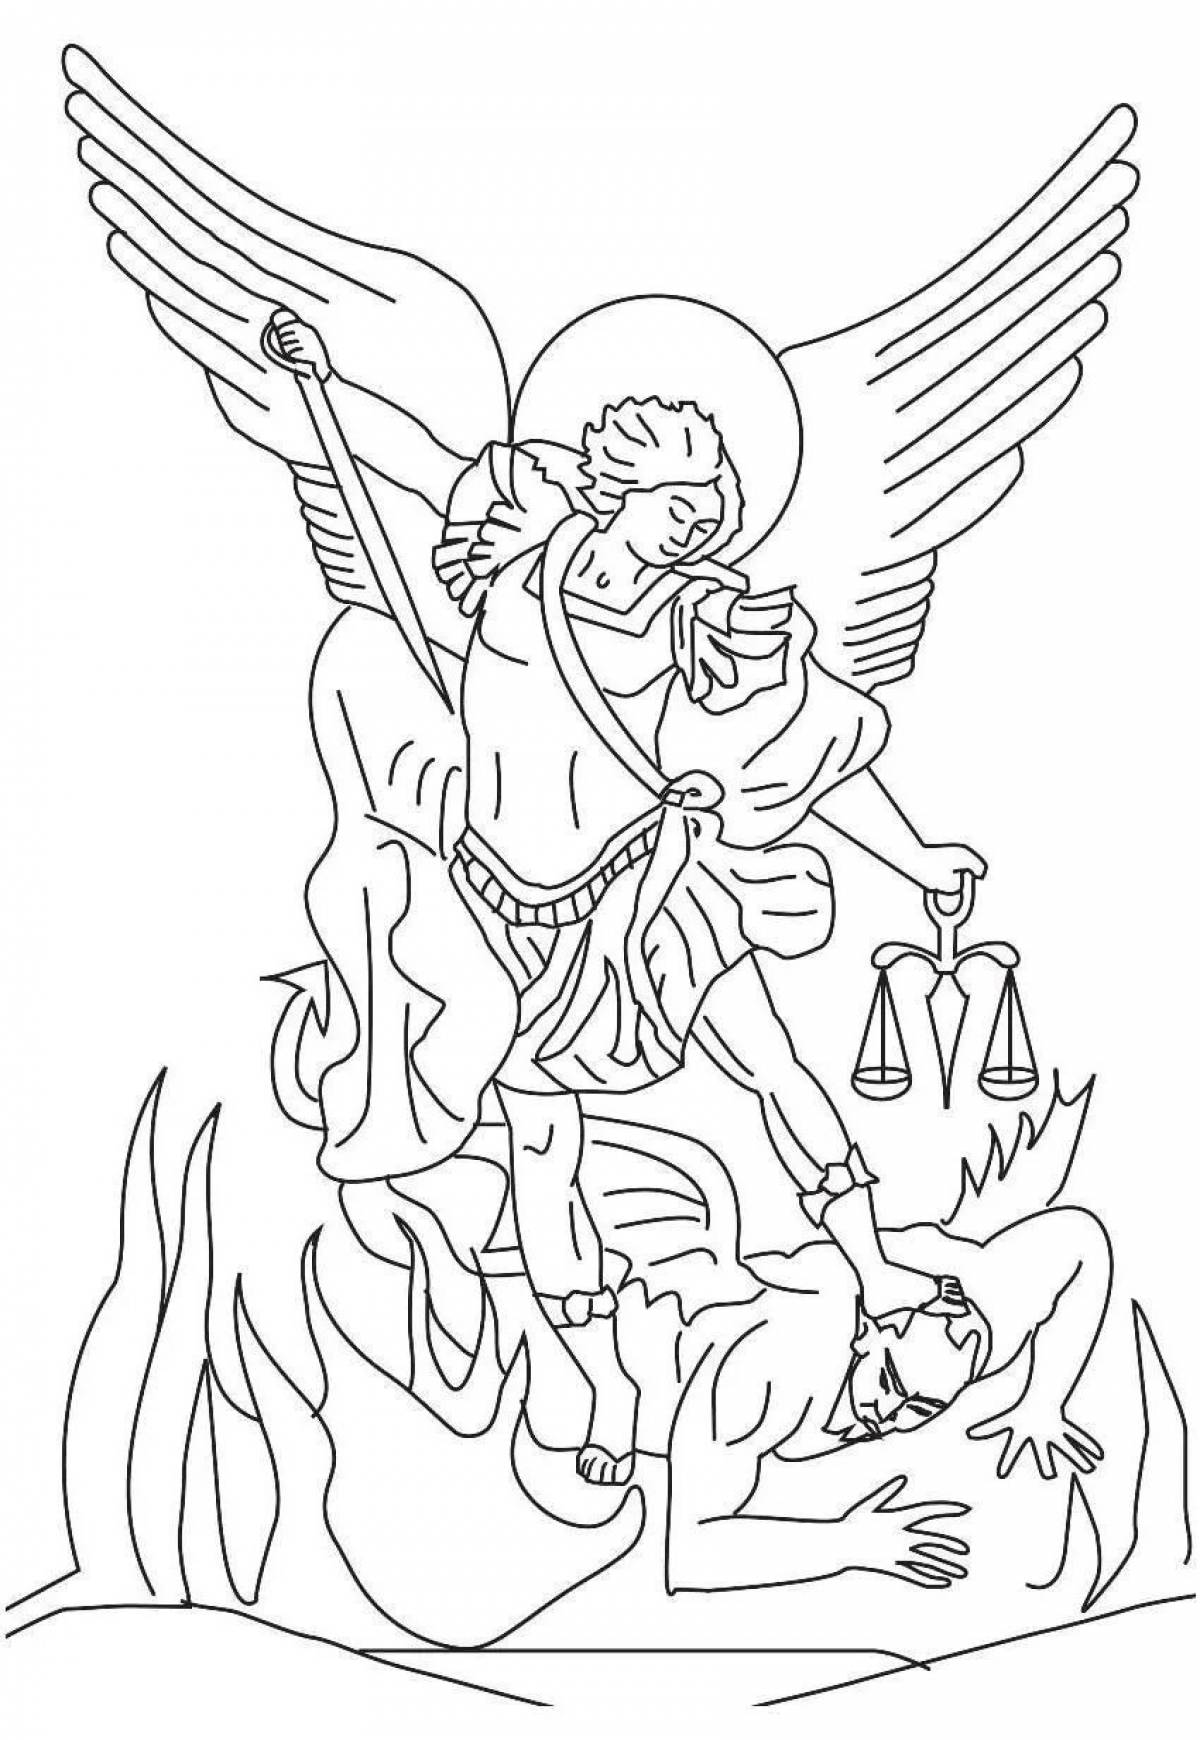 Coloring page kind george the victorious